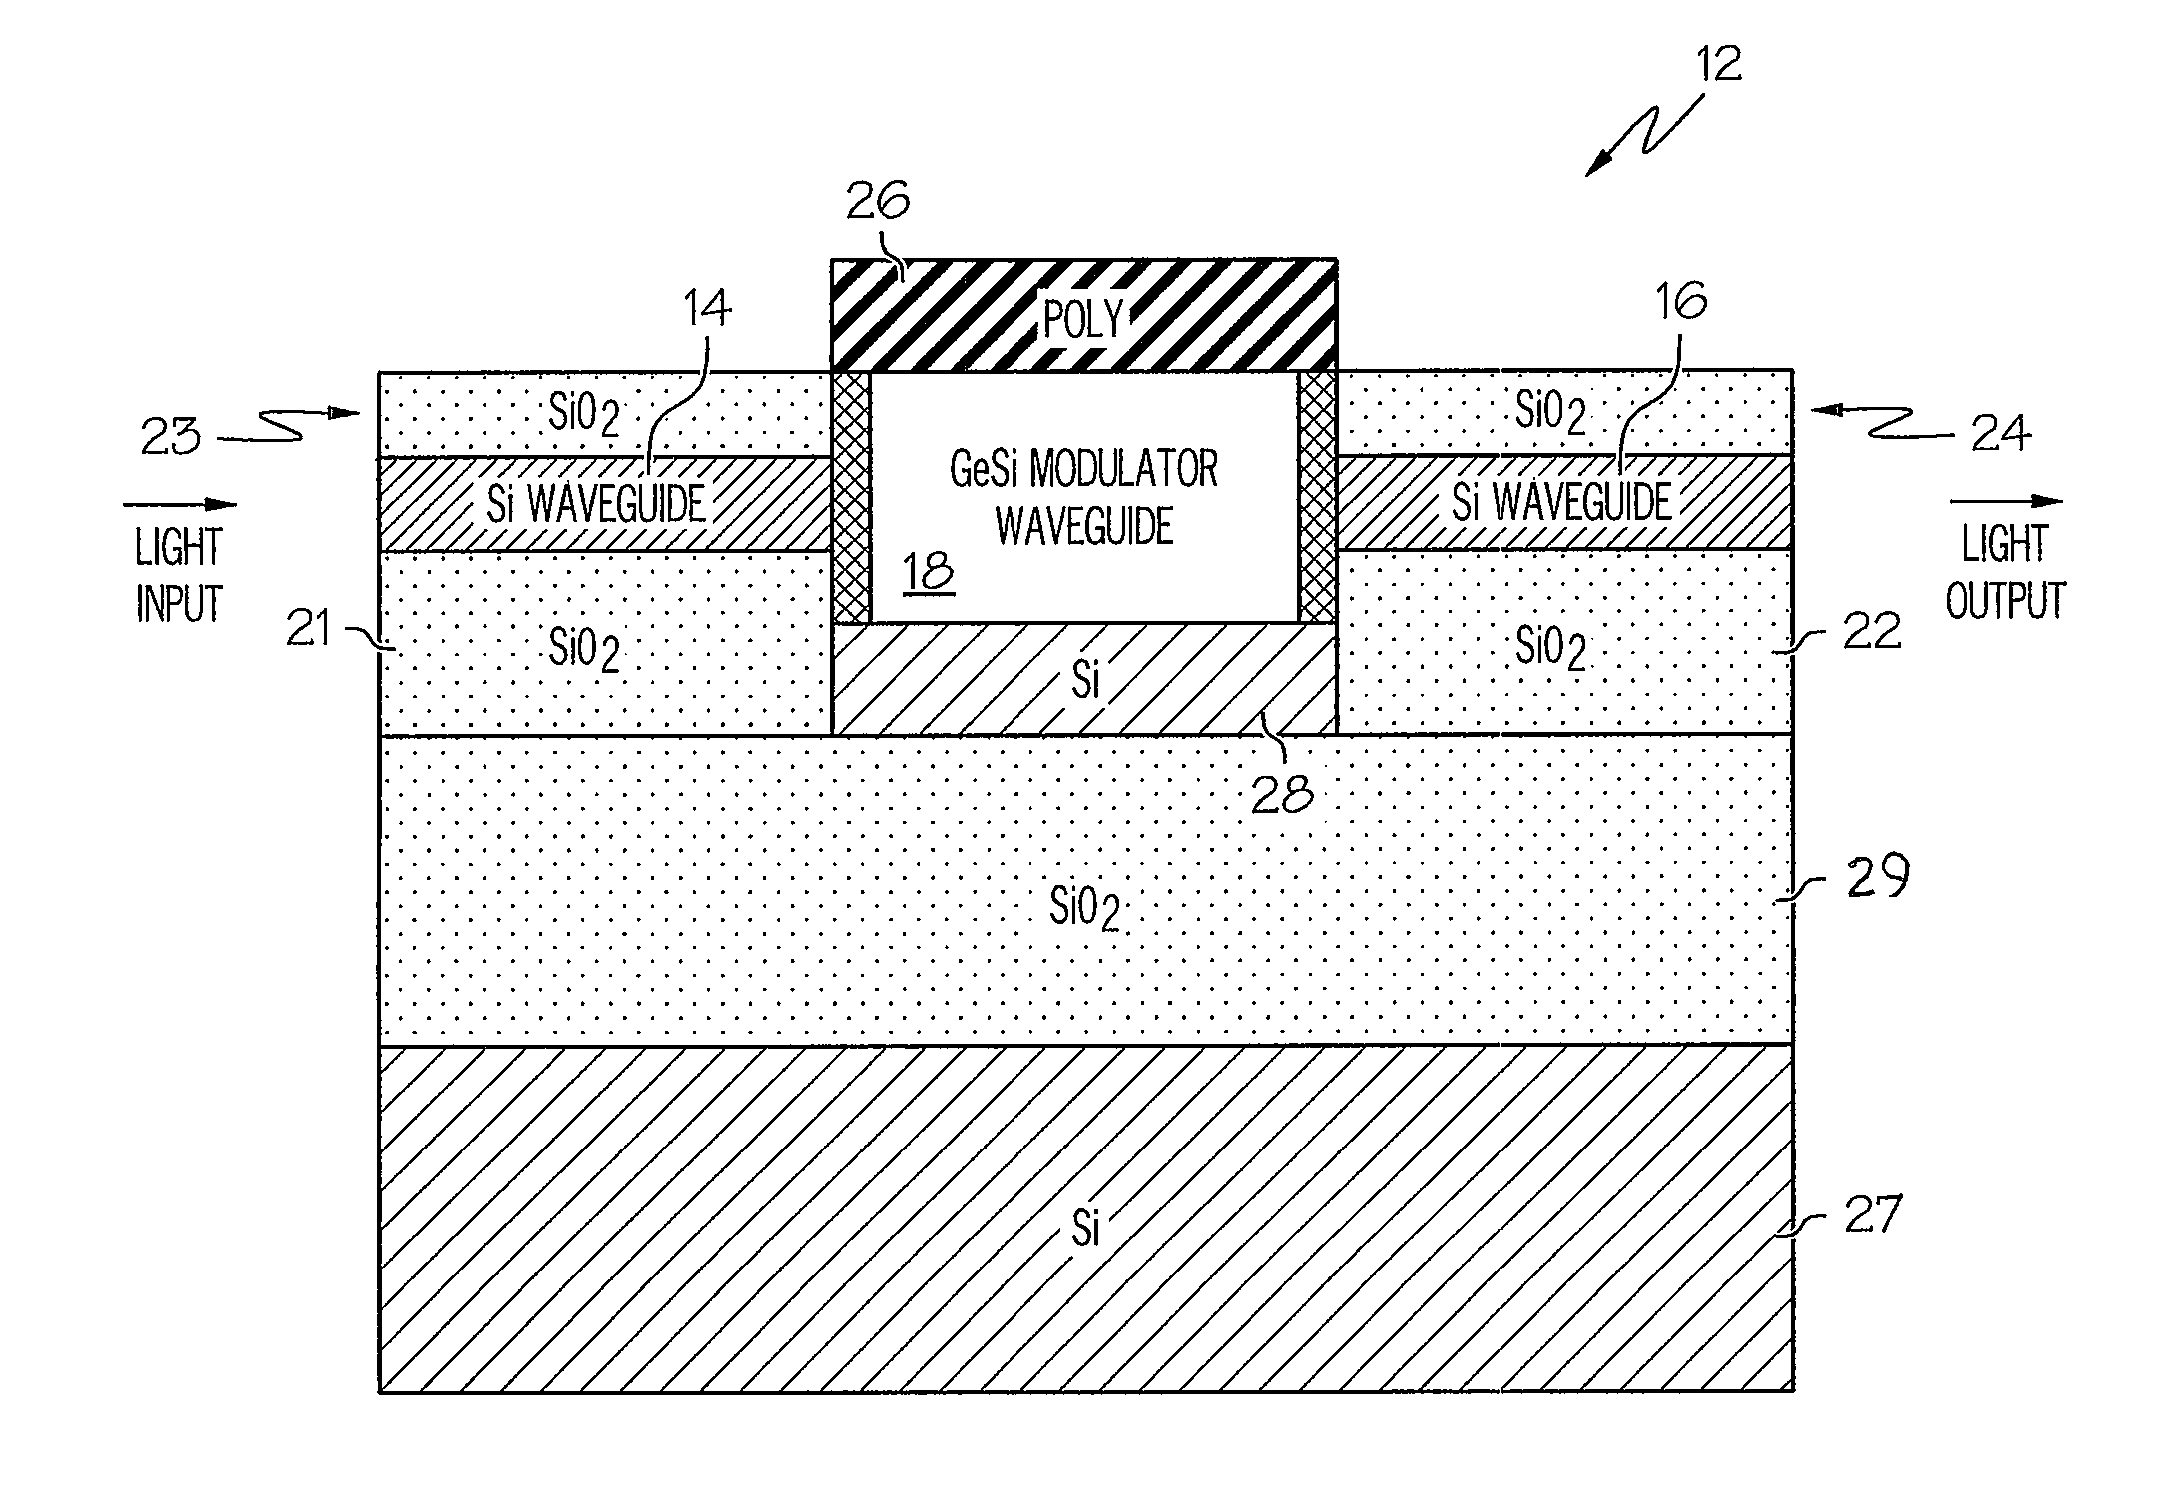 Method for fabricating butt-coupled electro-absorptive modulators